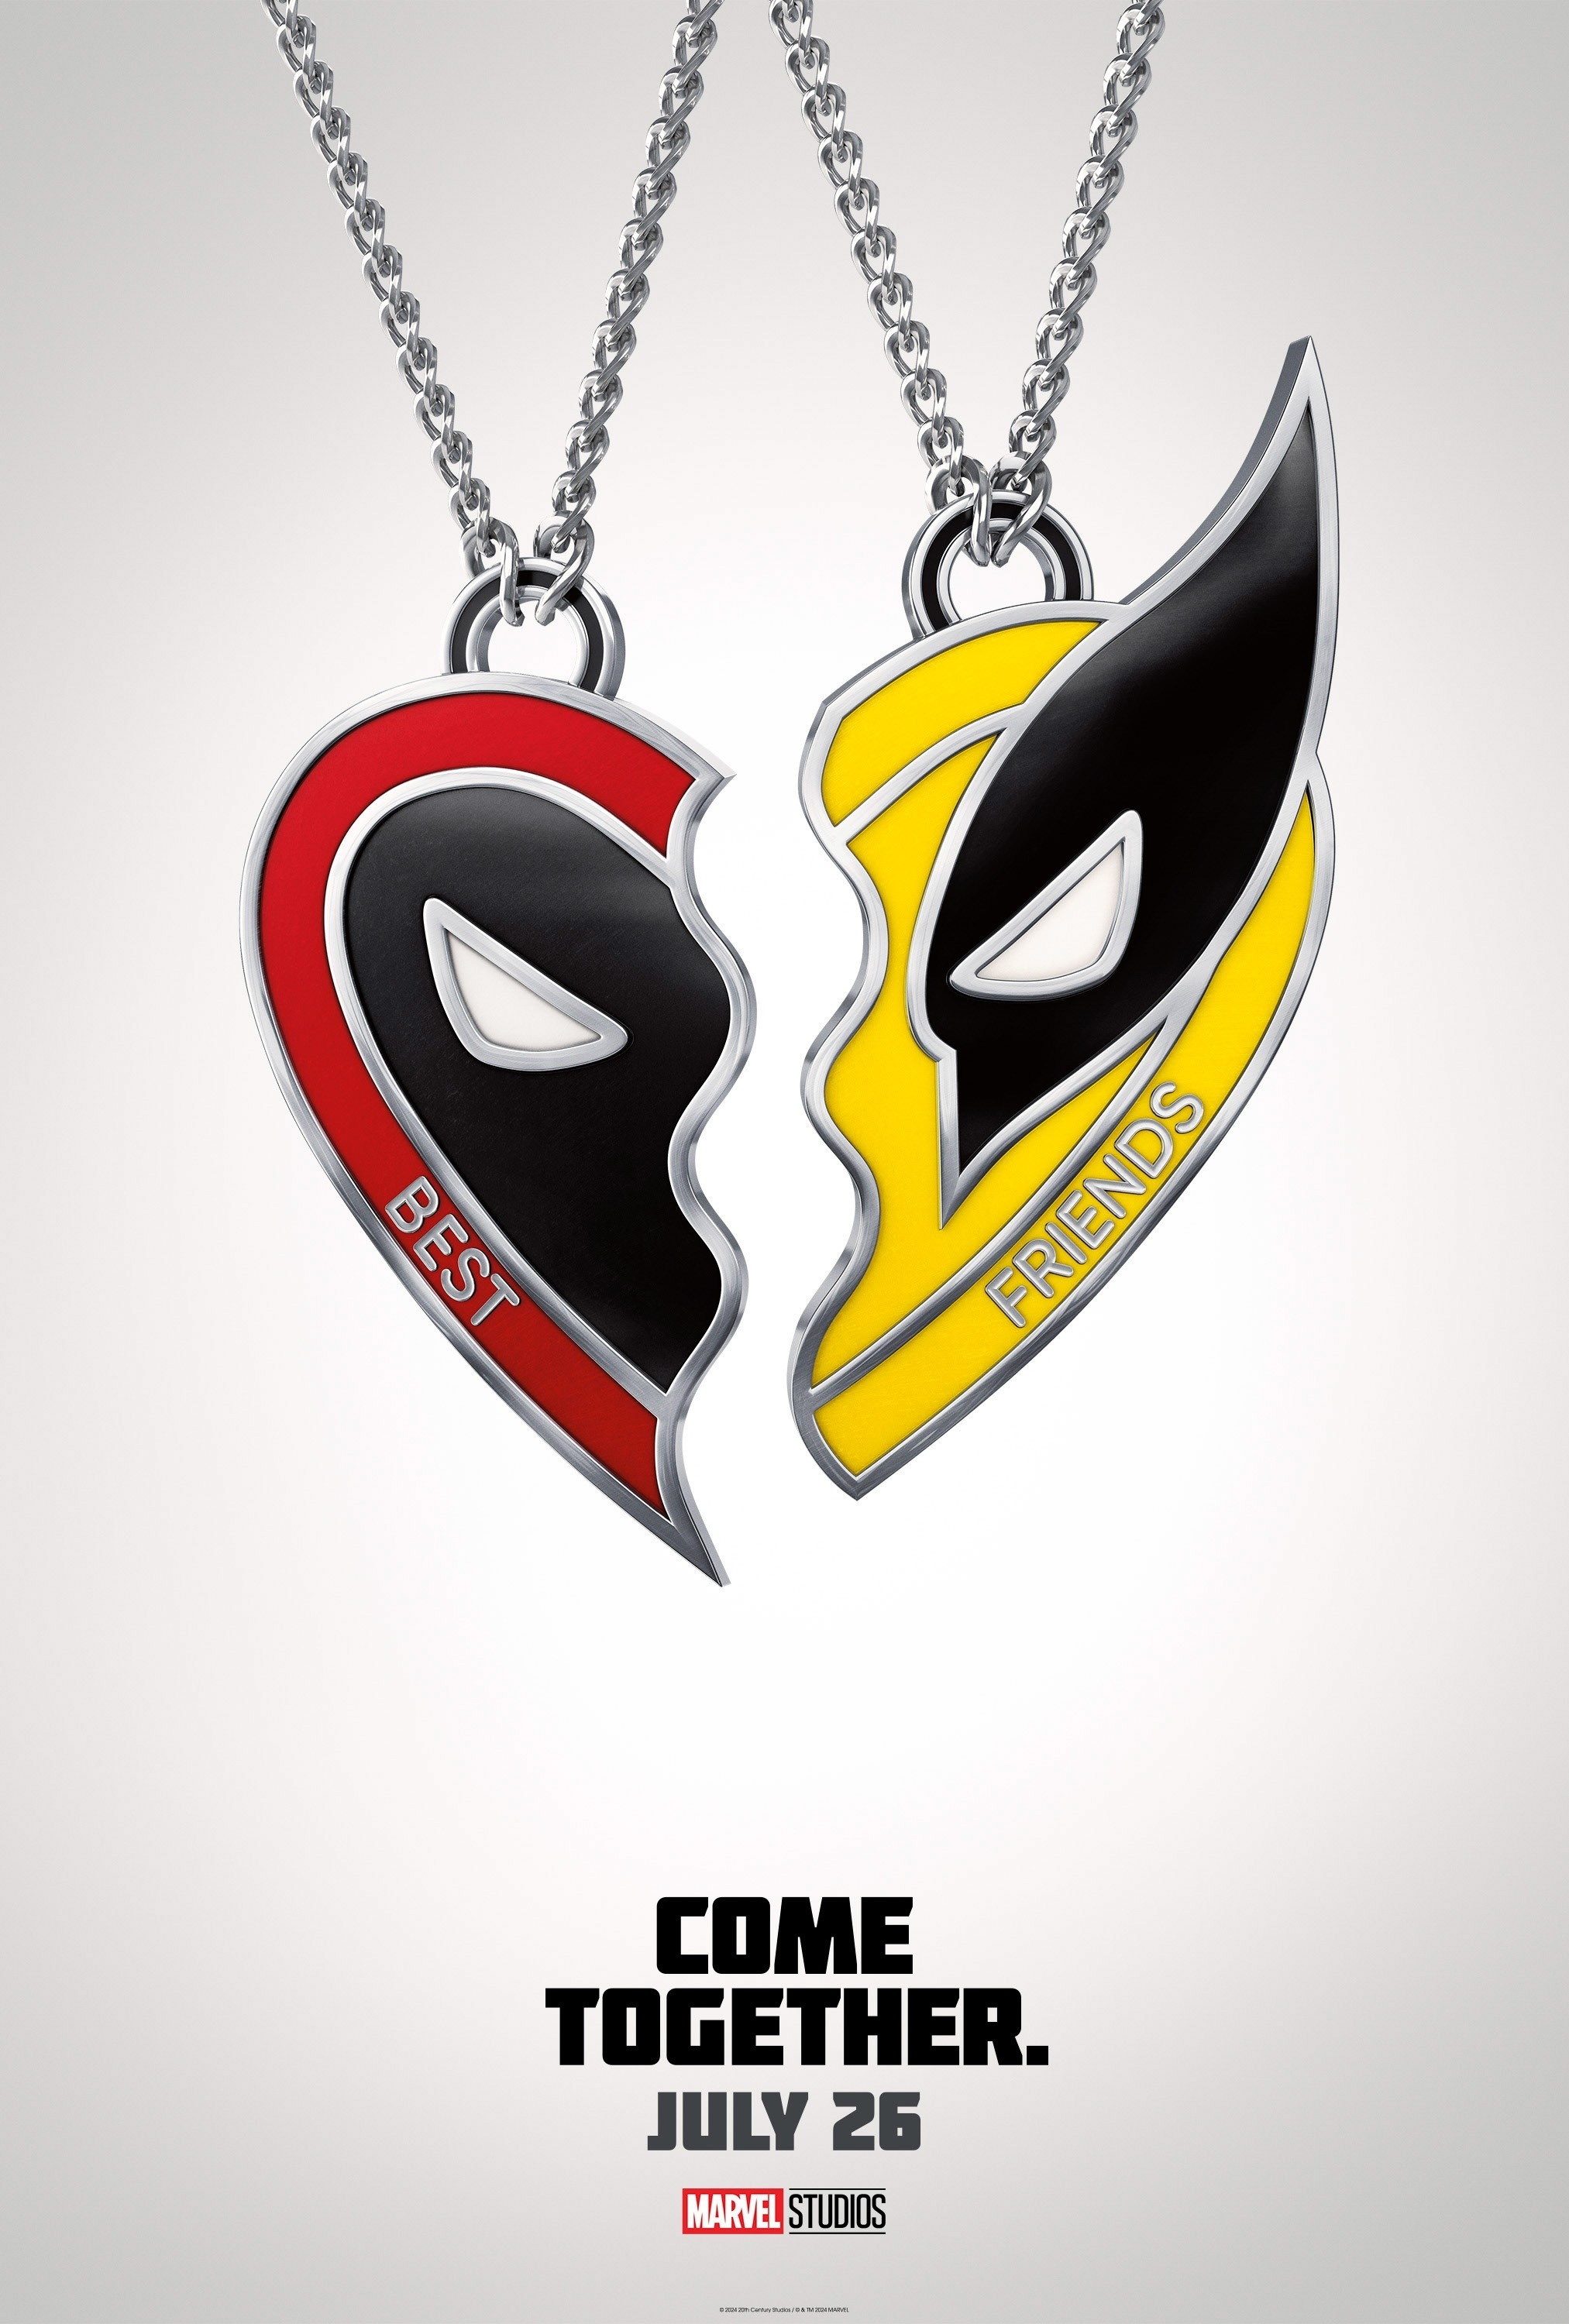 Two necklaces with half-heart pendants featuring Deadpool and Spider-Man logos. Text: &quot;Come Together. July 26. Marvel Studios.&quot;